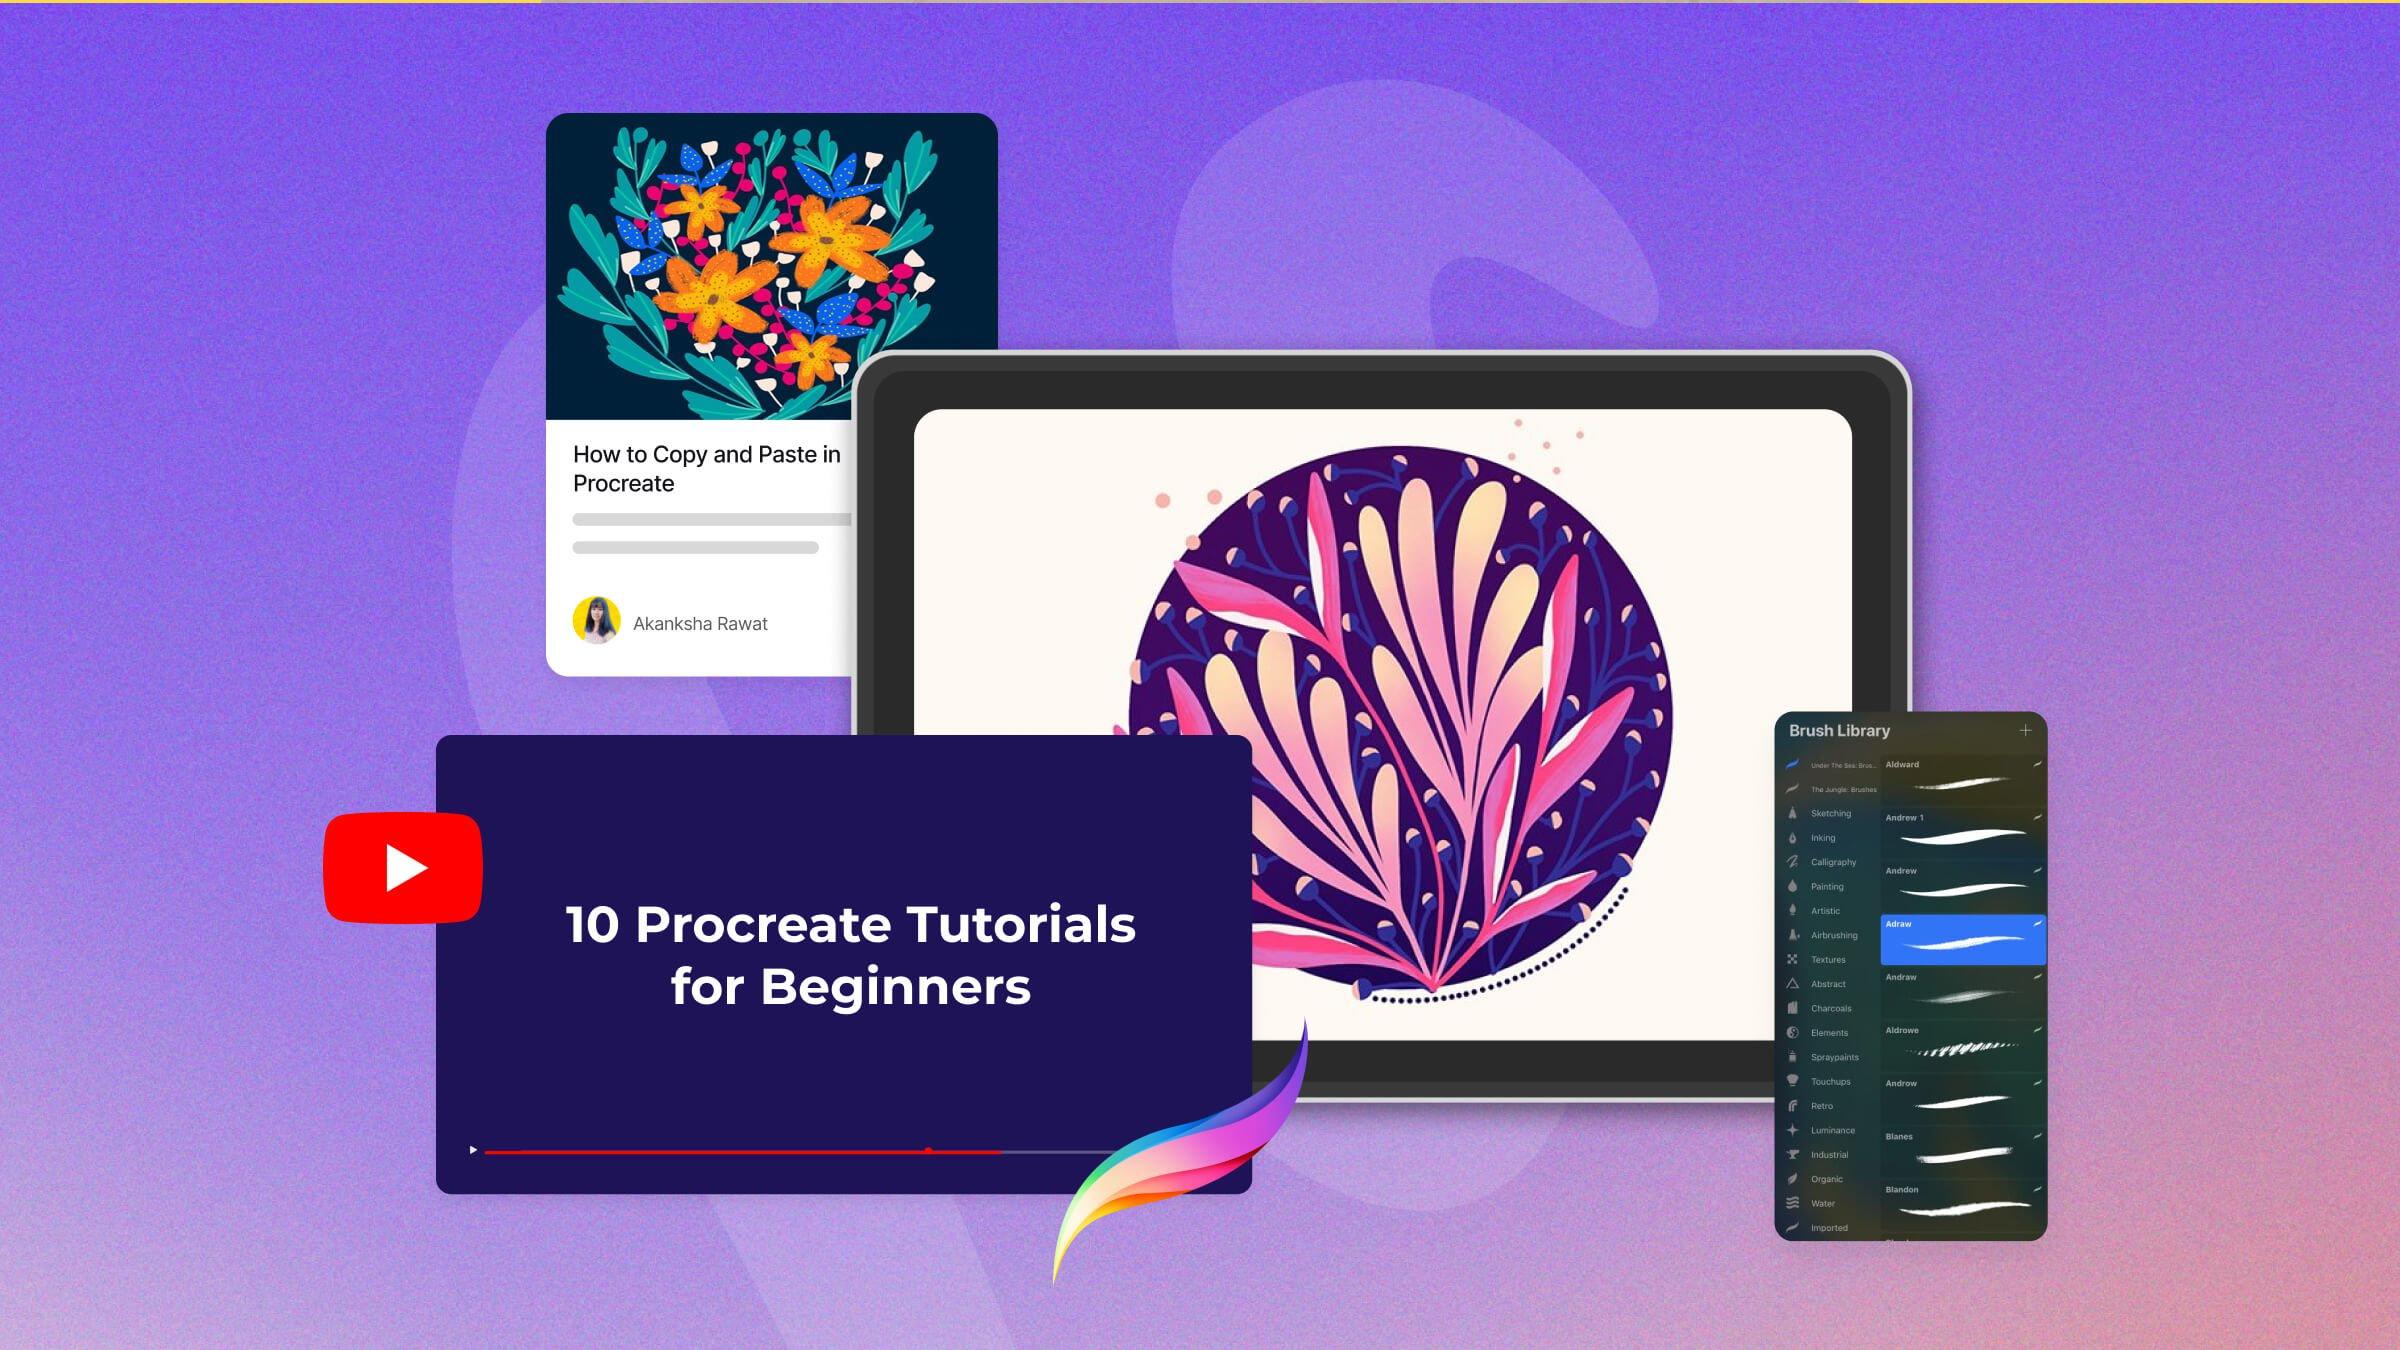 Getting Started with Procreate: Top 10 Procreate Tutorials for Beginners